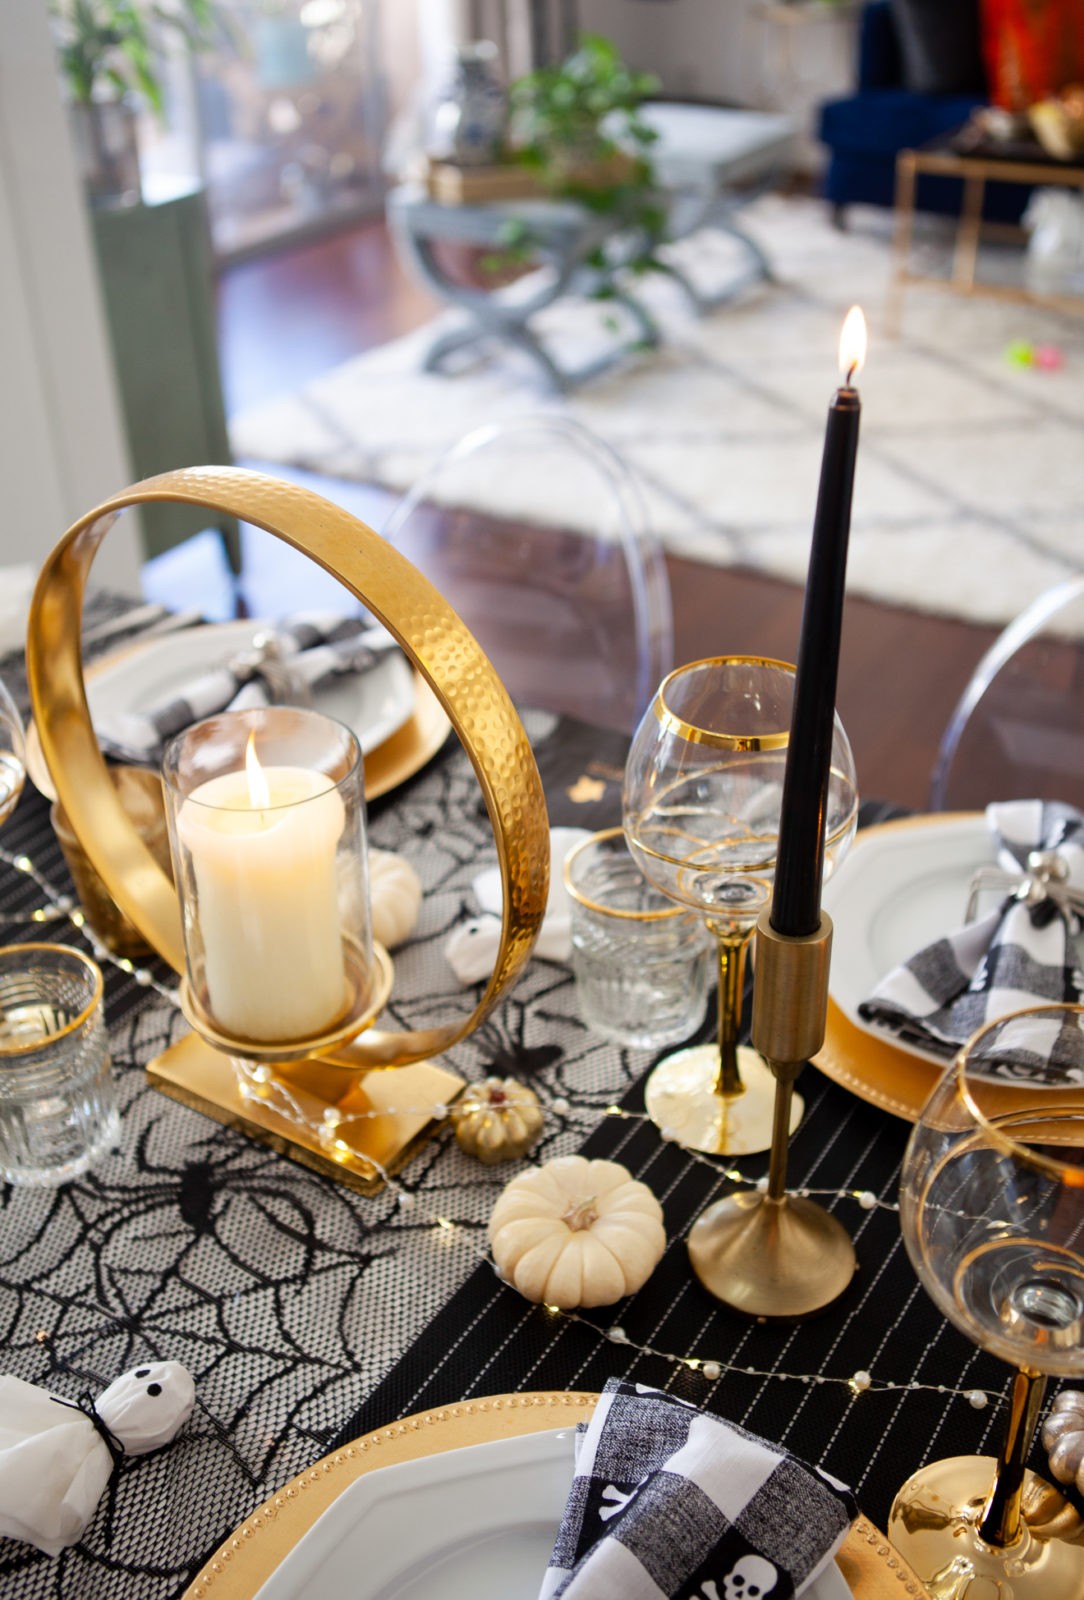 Fun and Easy Halloween Tablescape Decorating Ideas by Home Decor Blogger Laura Lily | Fun and Easy Halloween Table Decor Ideas by popular California lifestyle blogger, Laura Lily: image of table decorated with black candlesticks, gold stem glassware, gold plate chargers, spider web tablecloth, black and white gingham napkins, and silver spider napkin rings. 